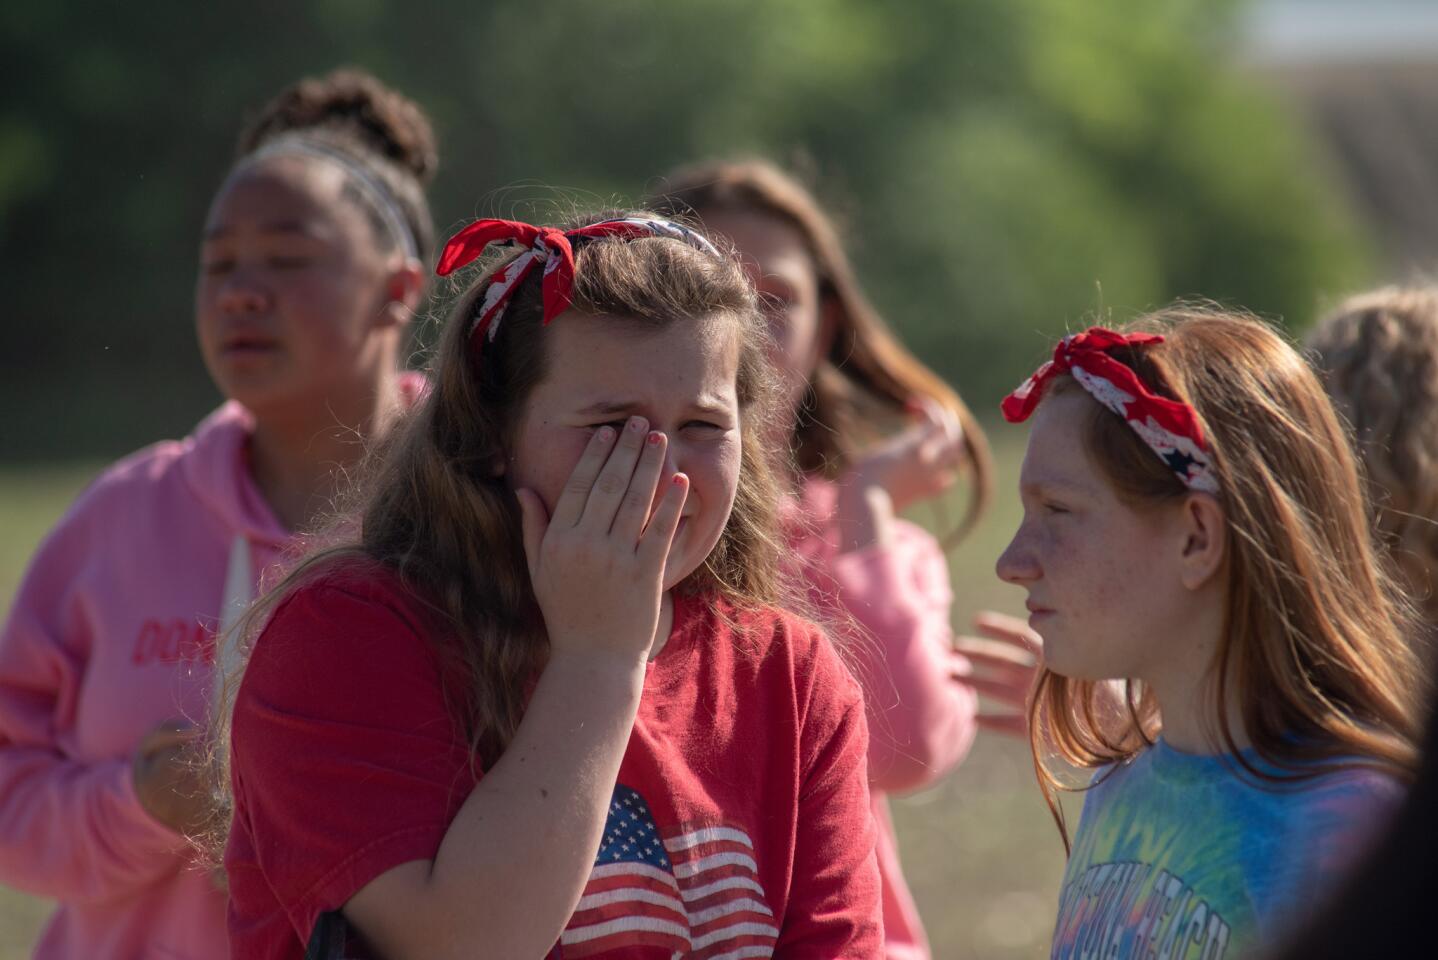 Students react outside Noblesville West Middle School after a shooting on May 25, 2018 in Noblesville, Indiana.